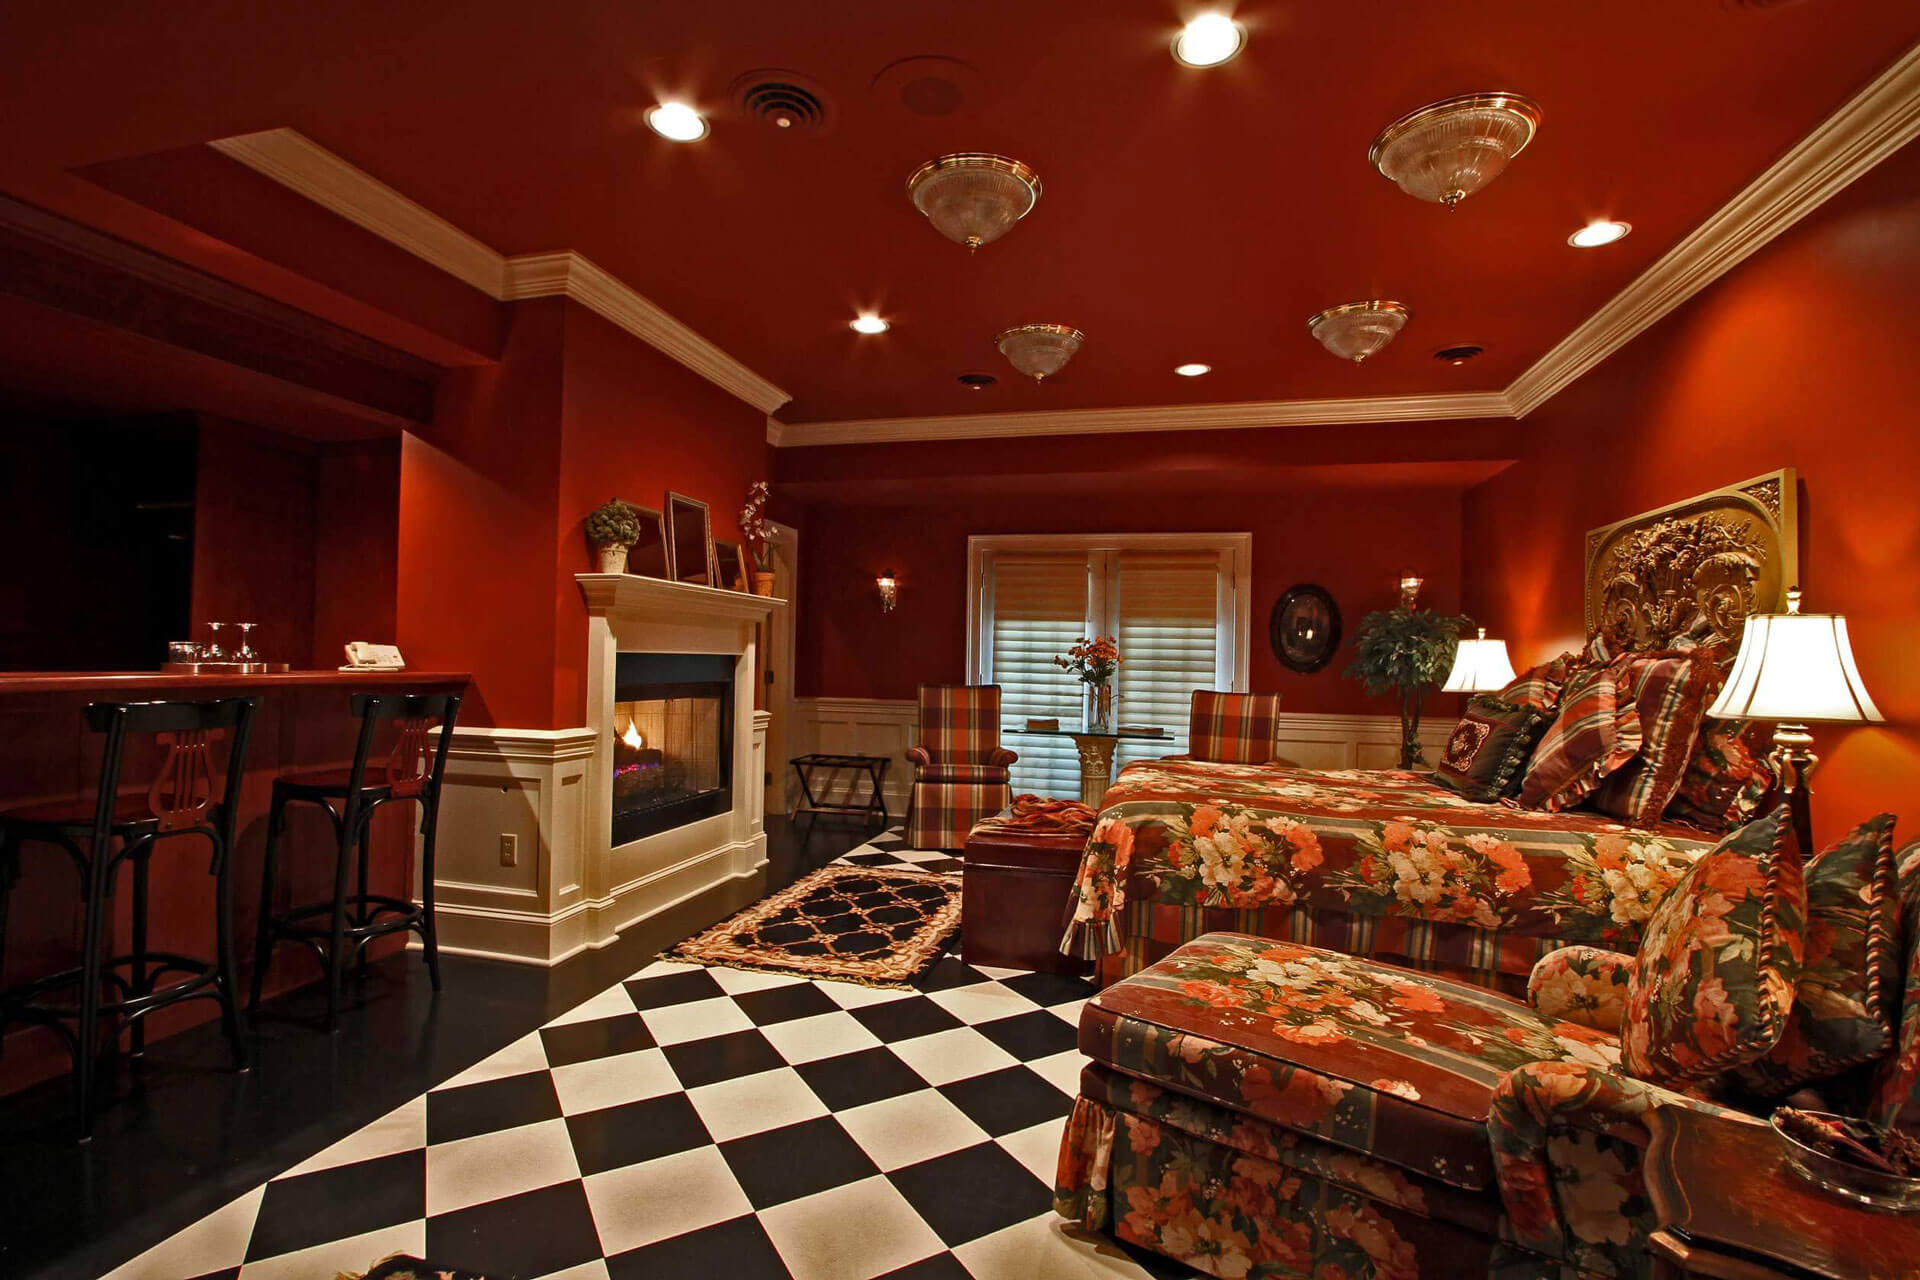 Claremont Room with Fireplace - Bed & breakfasts & inns of Colorado Association